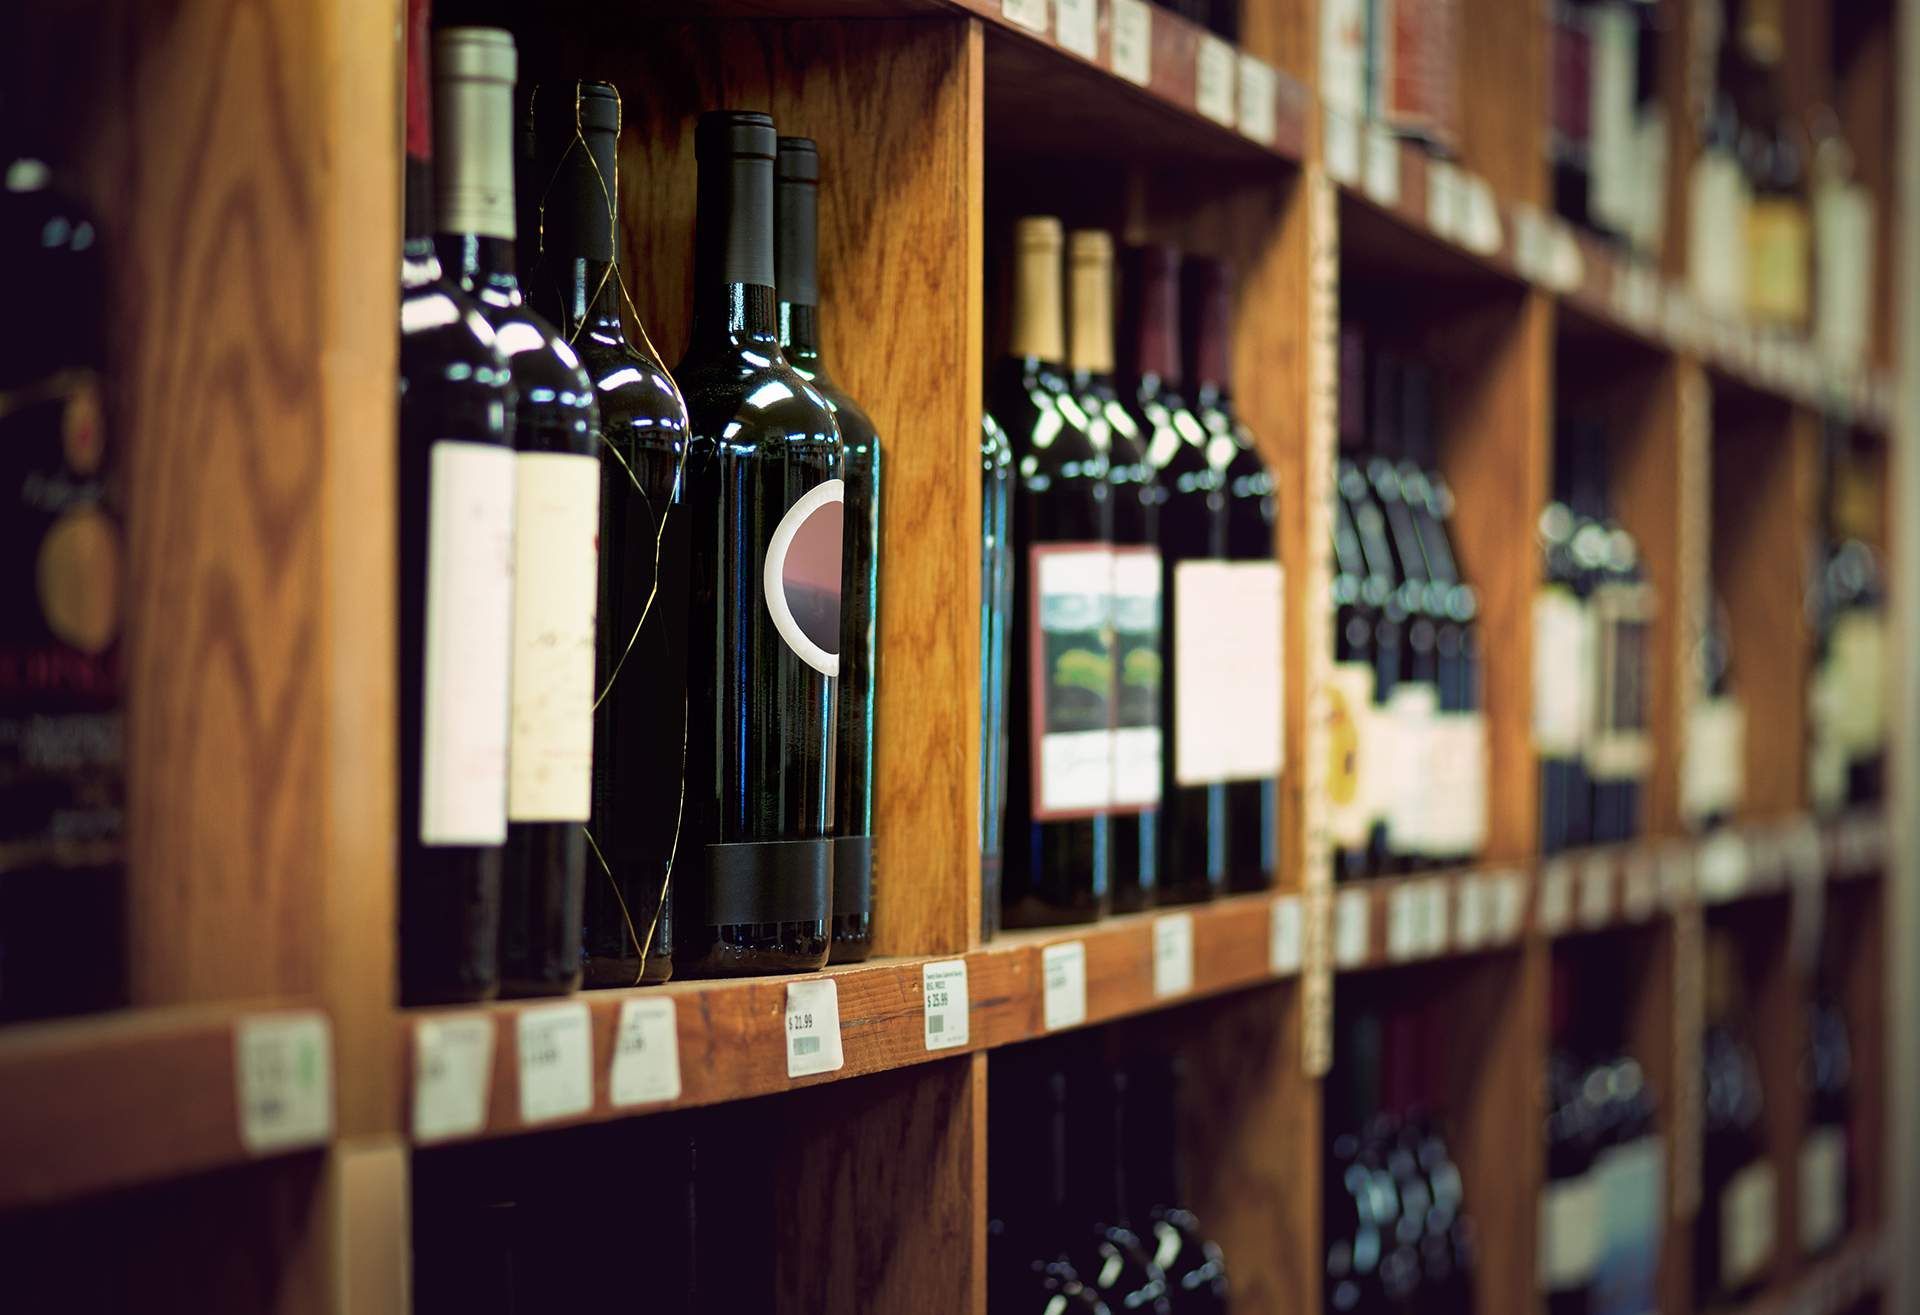 several bottles of wine are lined up on wooden shelves